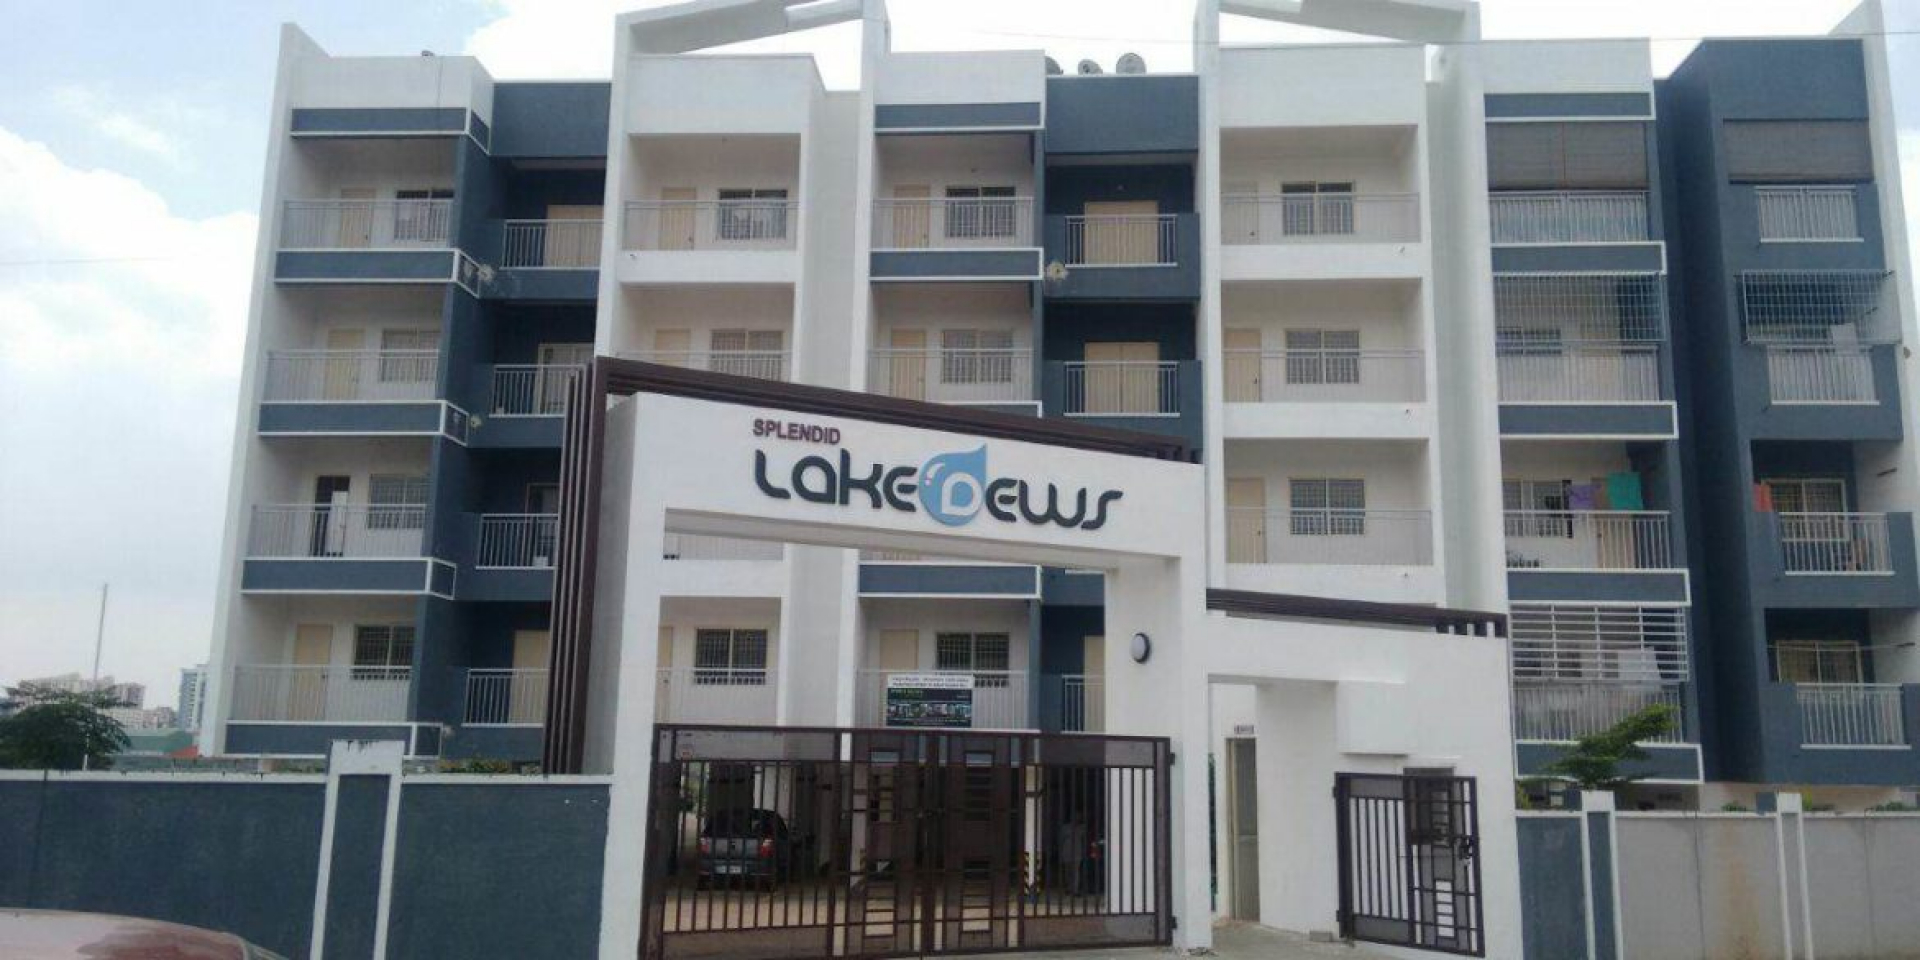 2, 3 BHK Apartment for sale in Begur Road